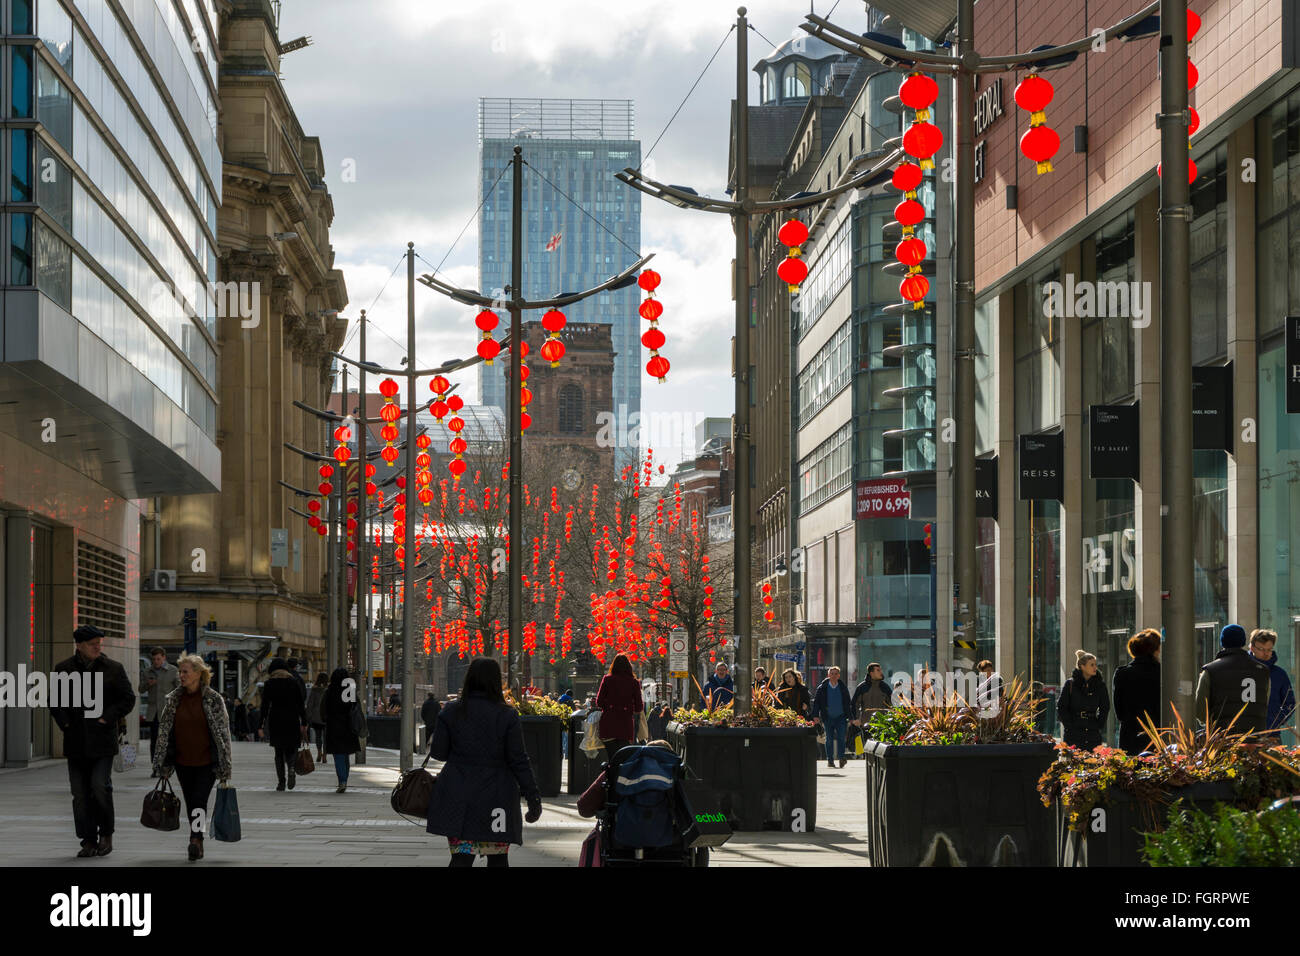 Chinese lanterns in St. Anne's Square Manchester, England, UK.  For Chinese New Year celebrations.  Beetham Tower behind. Stock Photo